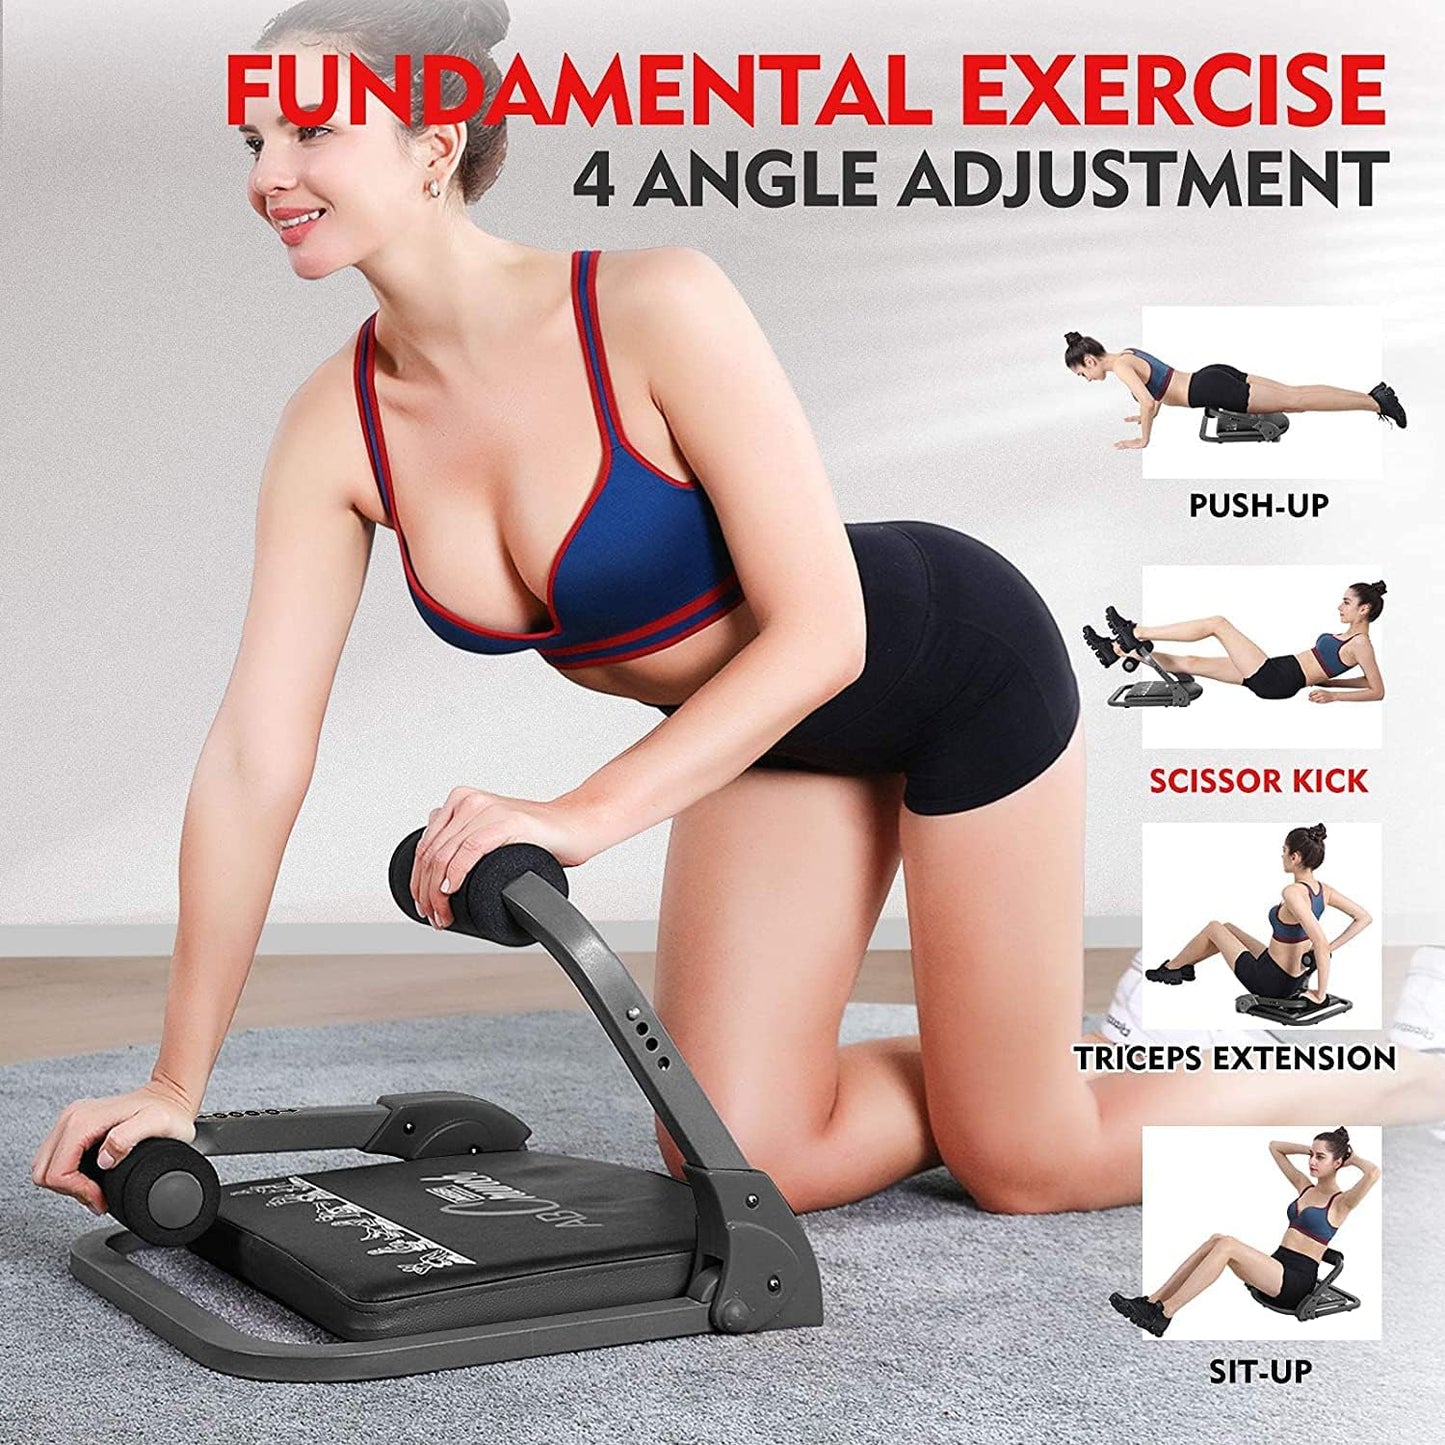 THE NUMBER ONE MBB Ab Crunch Machine,Exercise Equipment for Home Gym Equipment for Strength Training with Resistance Bands, Abs and Total Body Workout,Sole Brand and Patent Owner